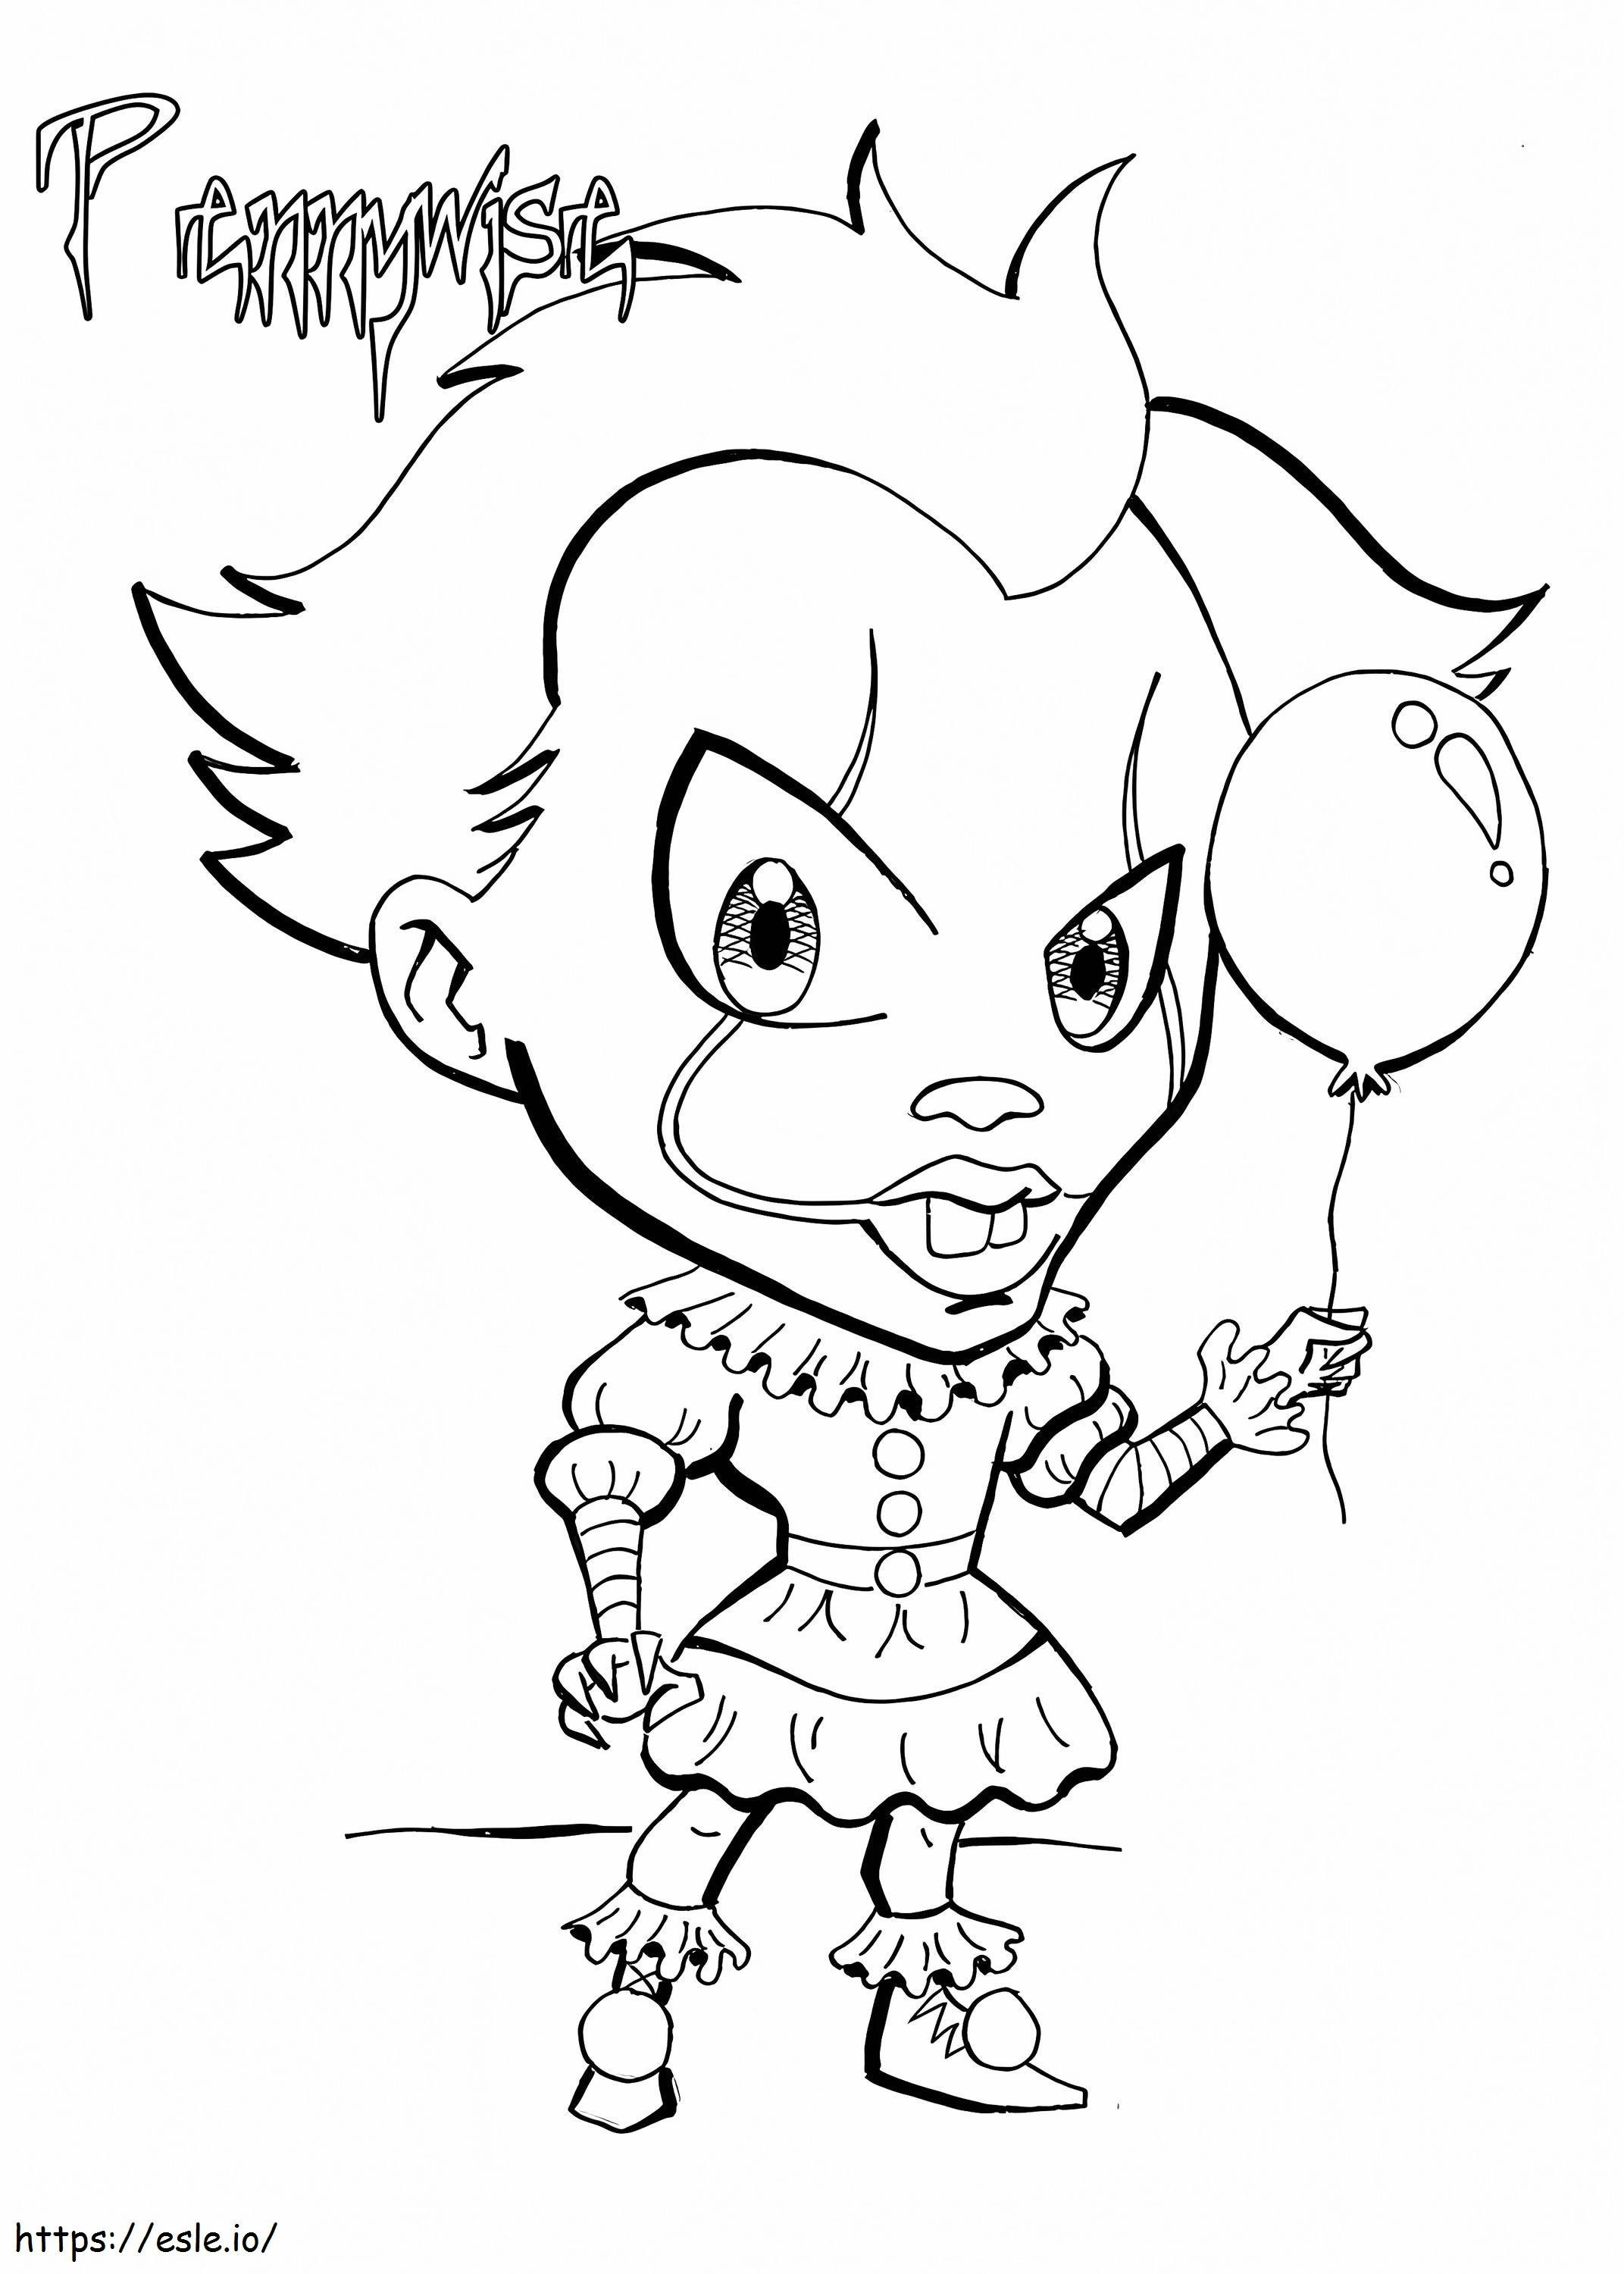 Pennywise Funny coloring page